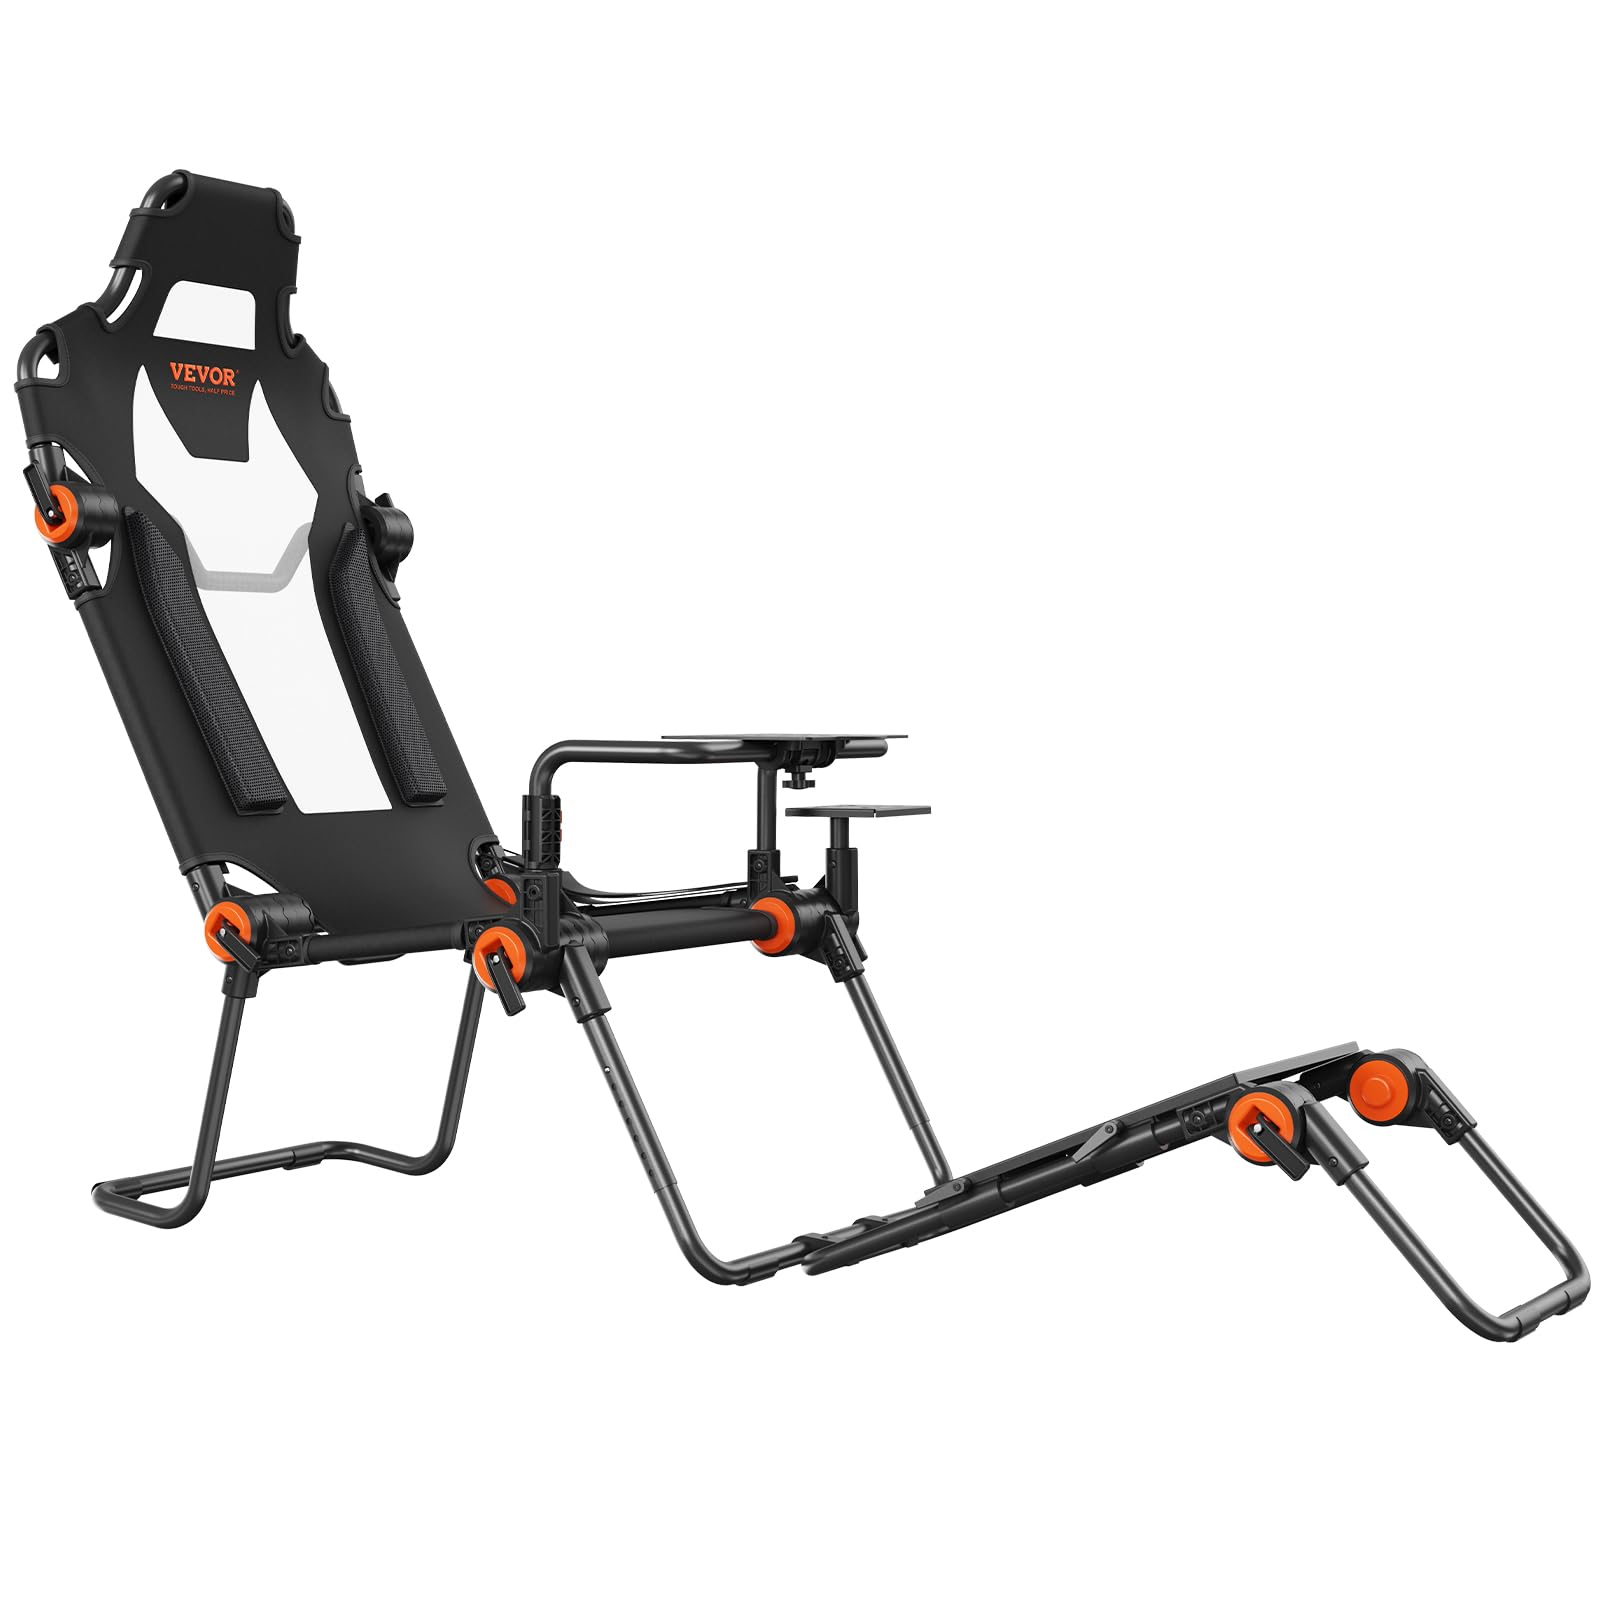 VEVOR Racing Wheel Stand Foldable Fit for Logitech,Thrustmaster,Fanatec,Hori,Mad Catz, Carbon Steel Driving Simulator Cockpit Adjustable Pedal & Dual-Mode Seating,Fit Most Steering Wheels and Pedals